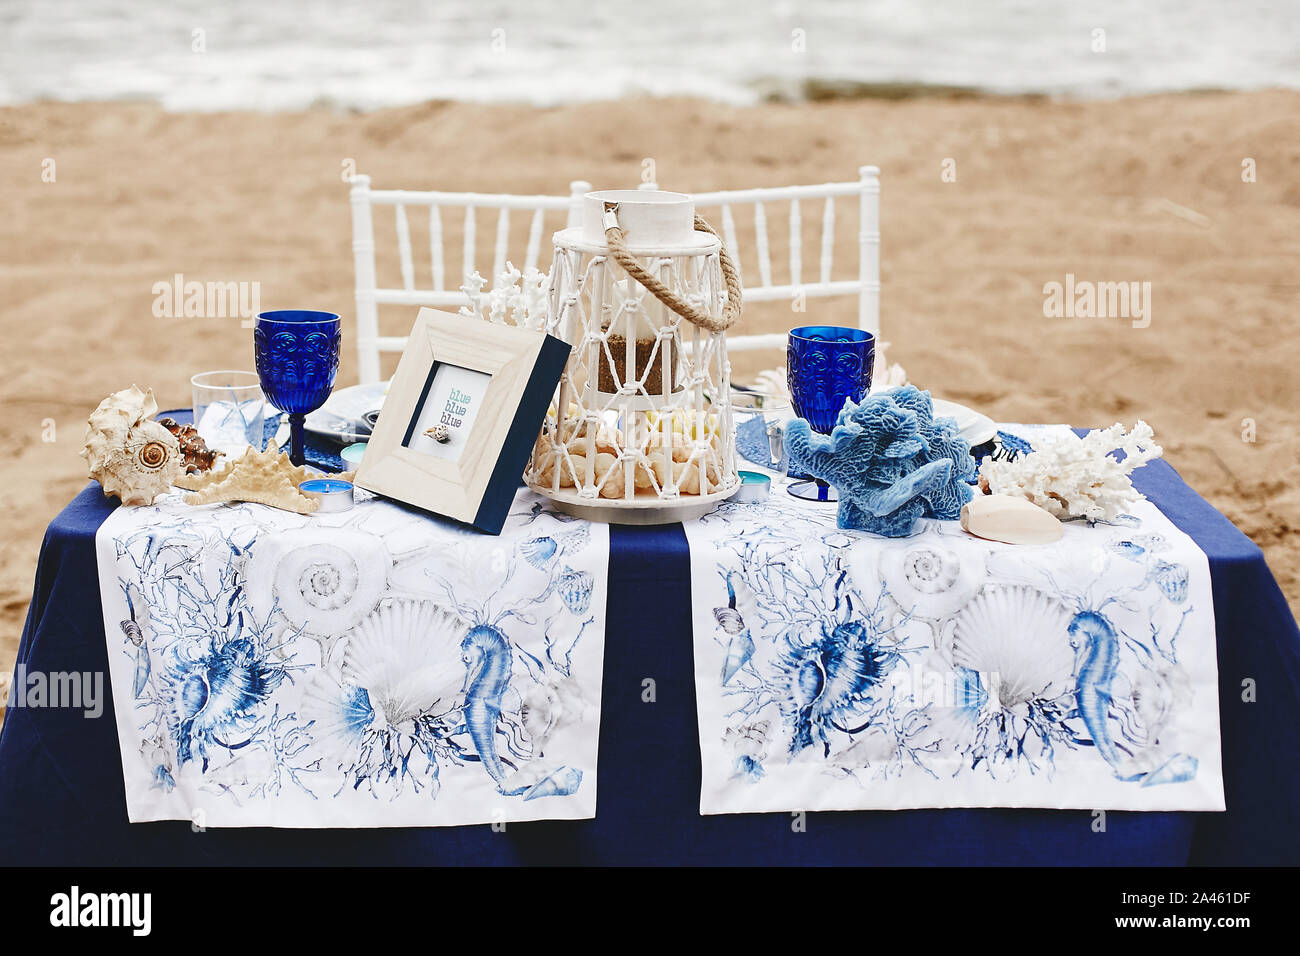 https://c8.alamy.com/comp/2A461DF/wedding-decoration-in-a-marine-style-table-for-the-bride-and-groom-on-a-sandy-beach-decorated-with-sea-shells-corals-candlelight-and-wineglass-2A461DF.jpg